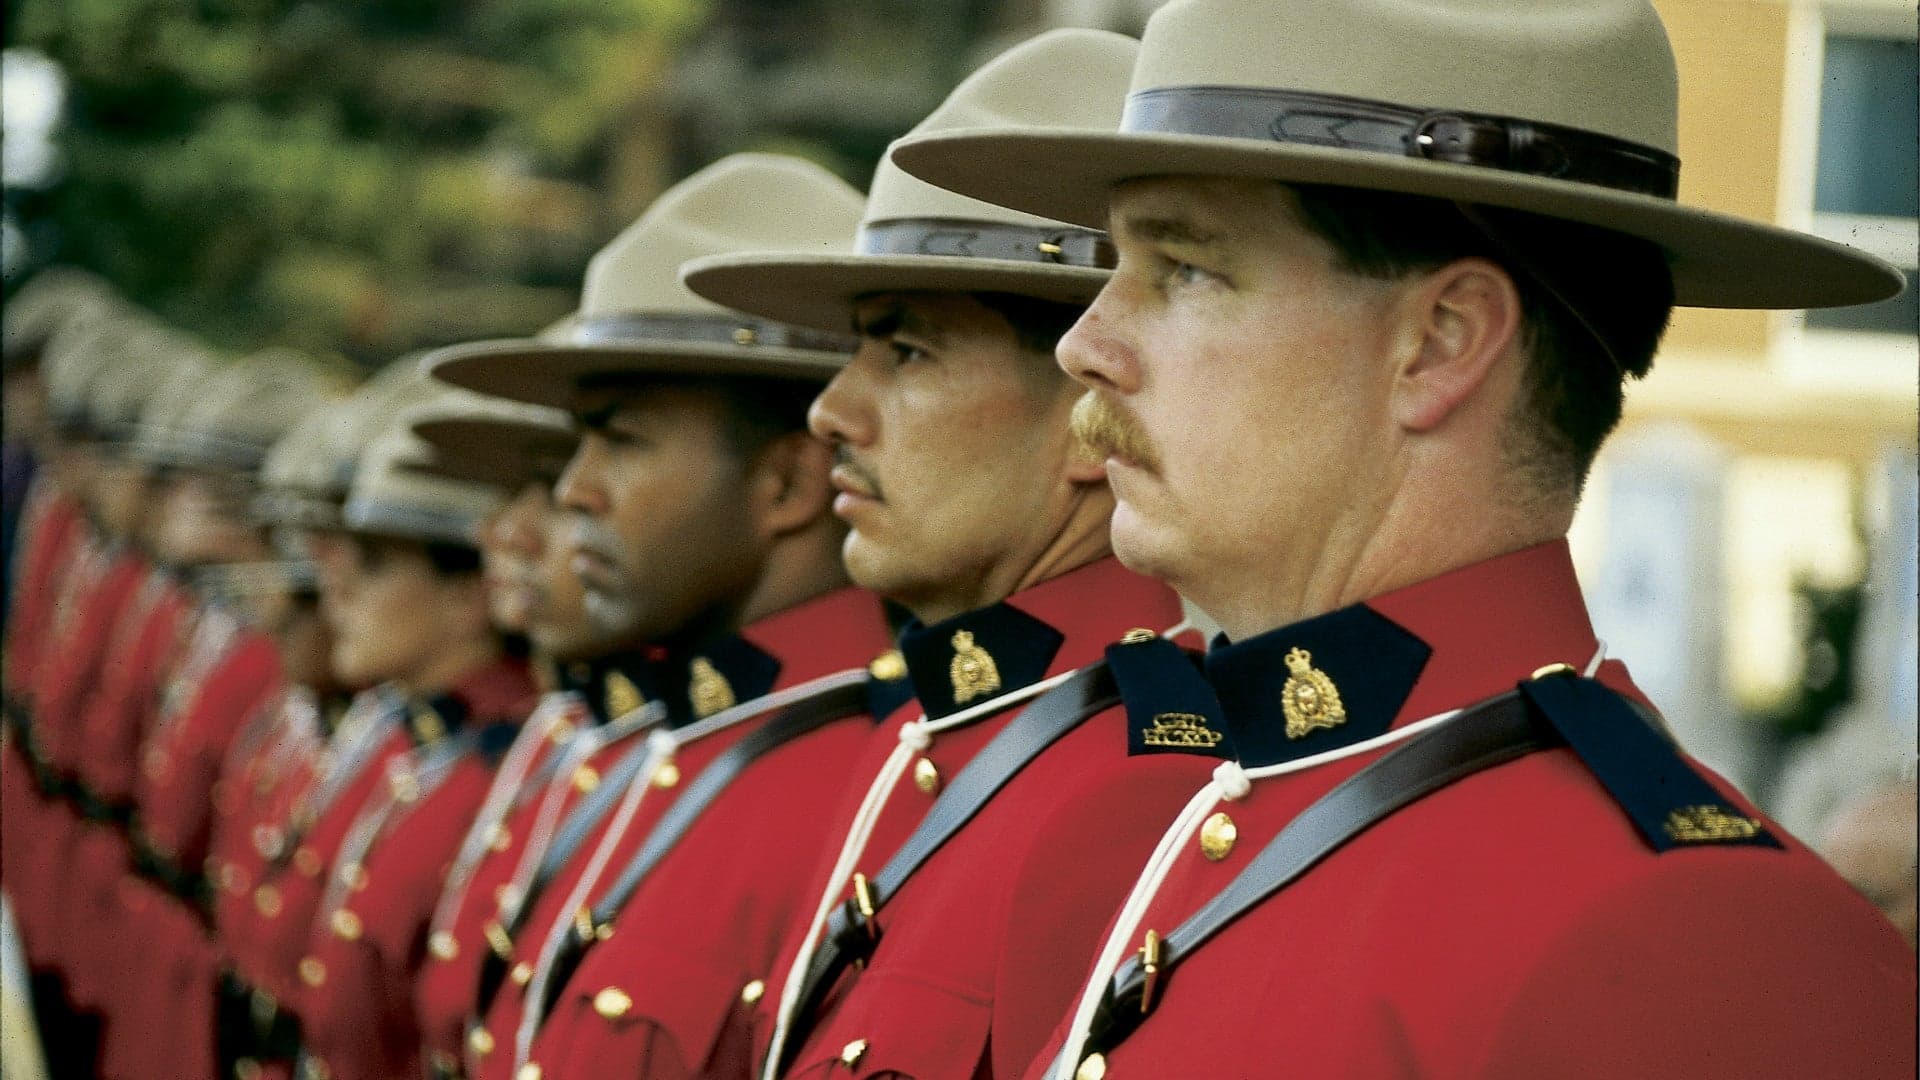 Canadian Mounties Have a New Weapon Against Texting and Driving